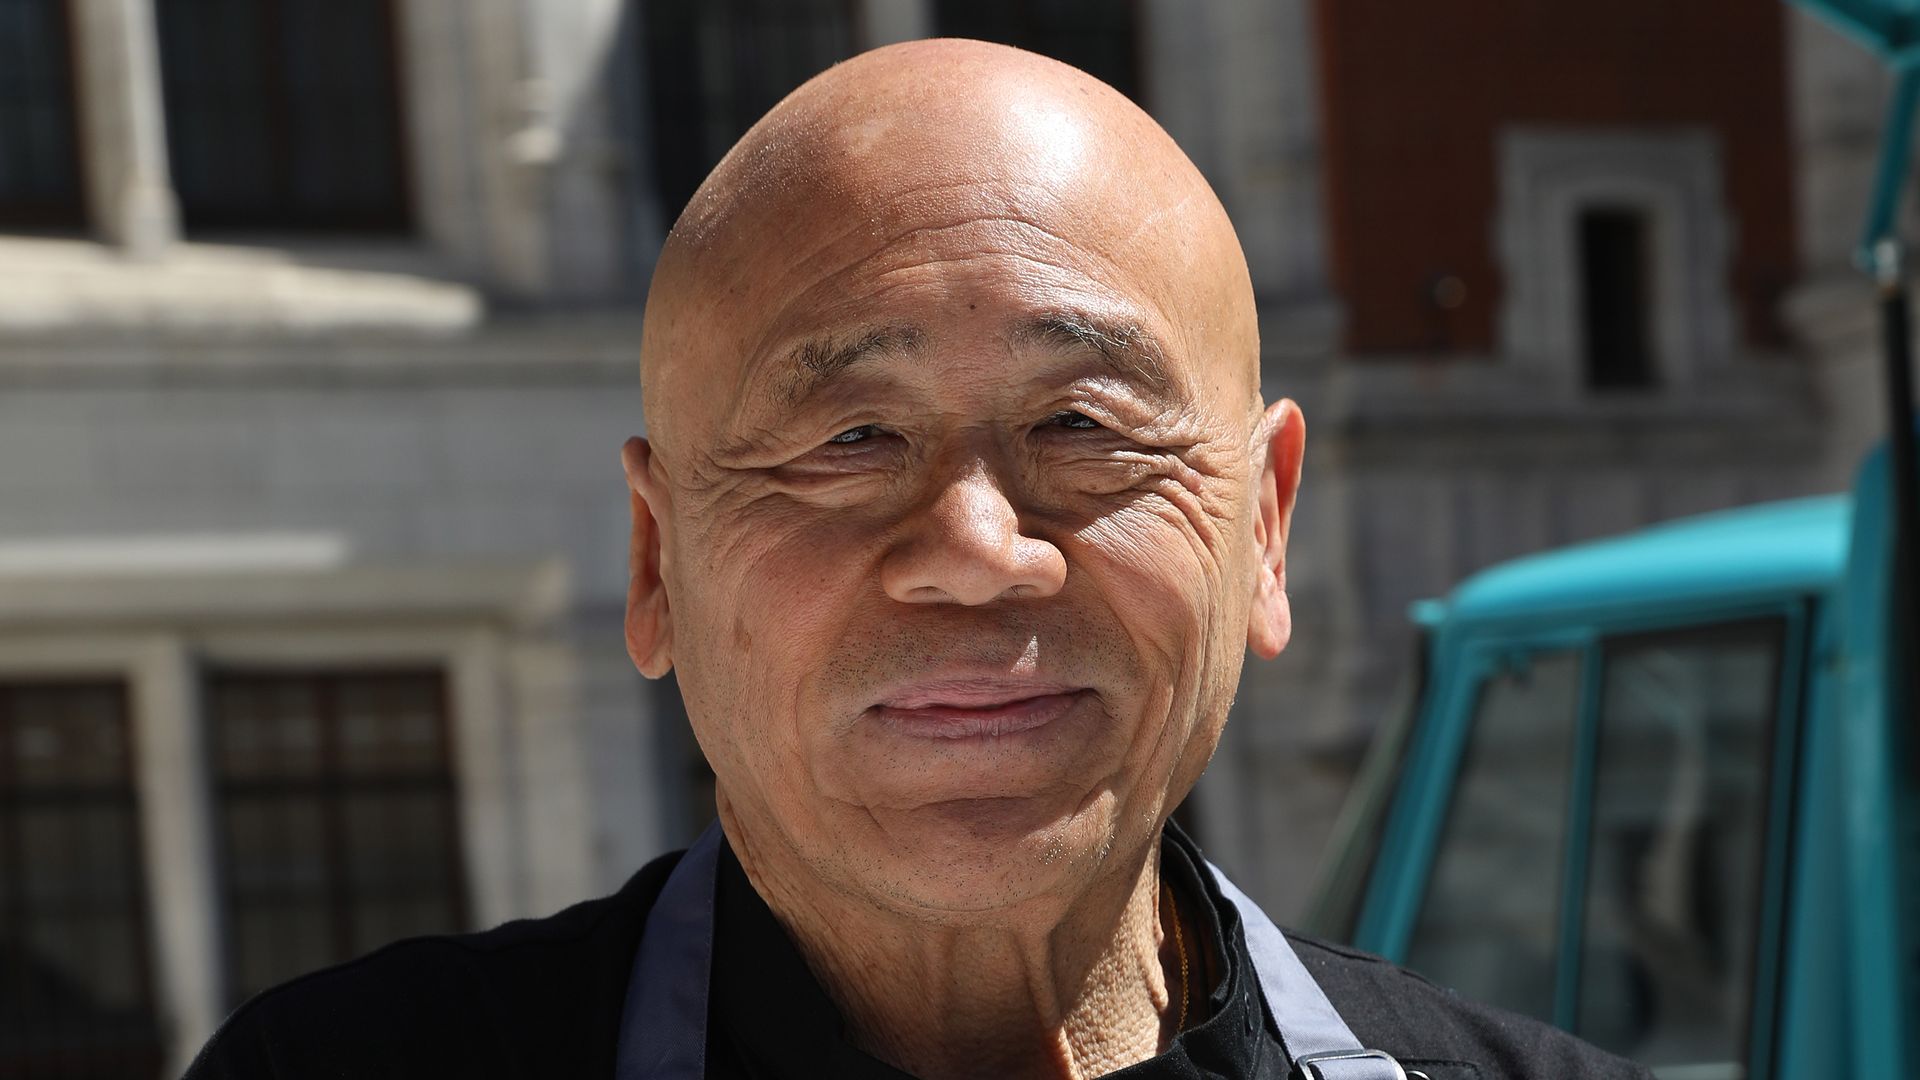 Chef Ken Hom smiling in an apron